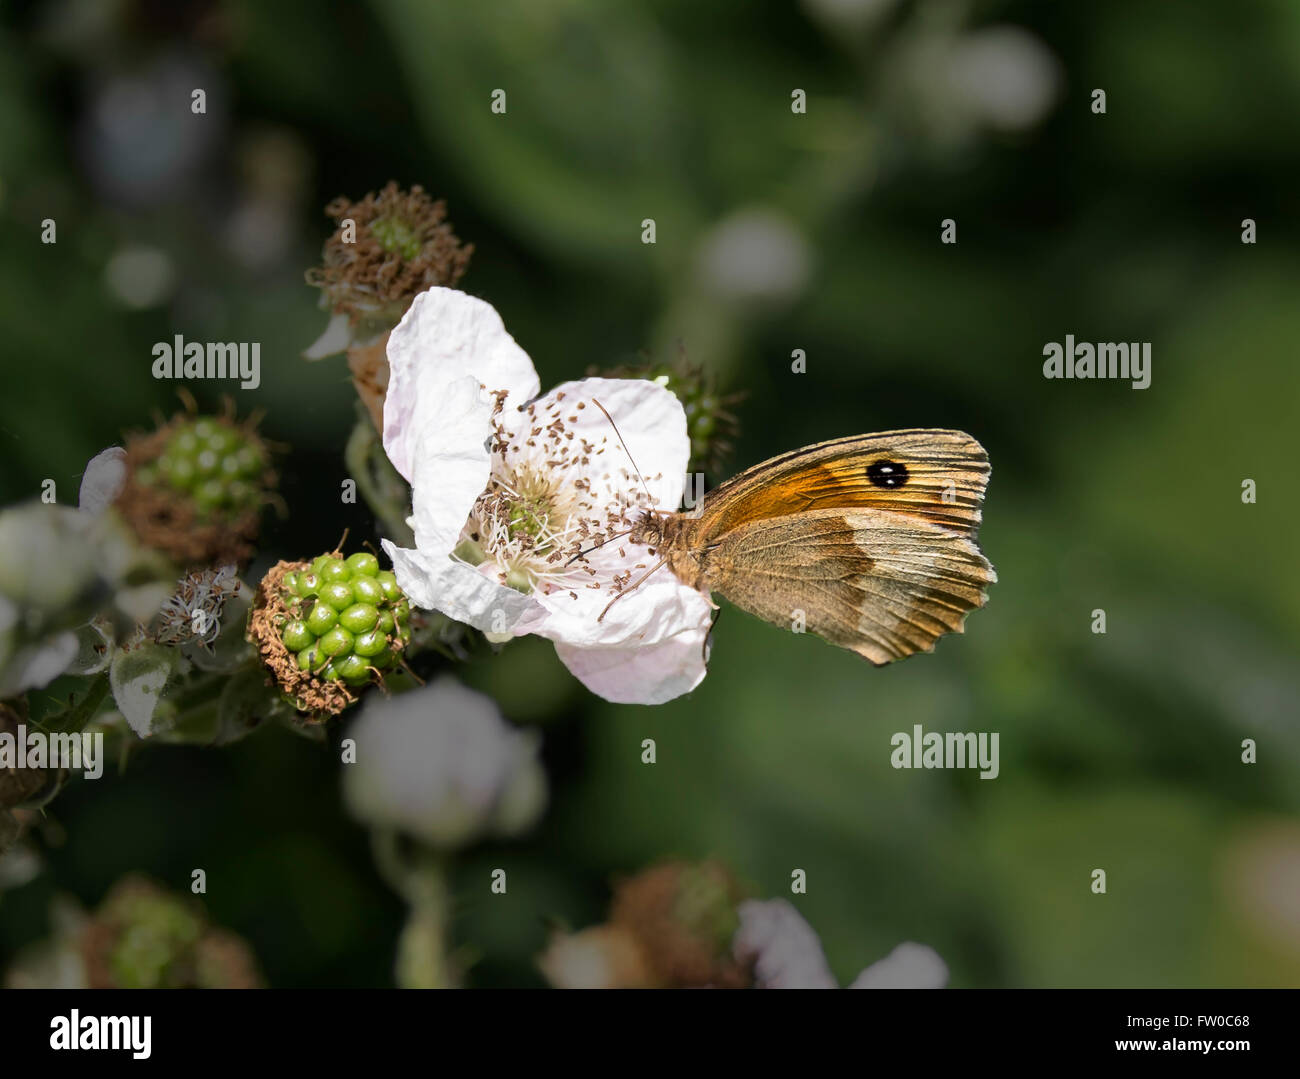 Grayling butterfly feeding on blackberry flower background darkened to make image stand out Stock Photo